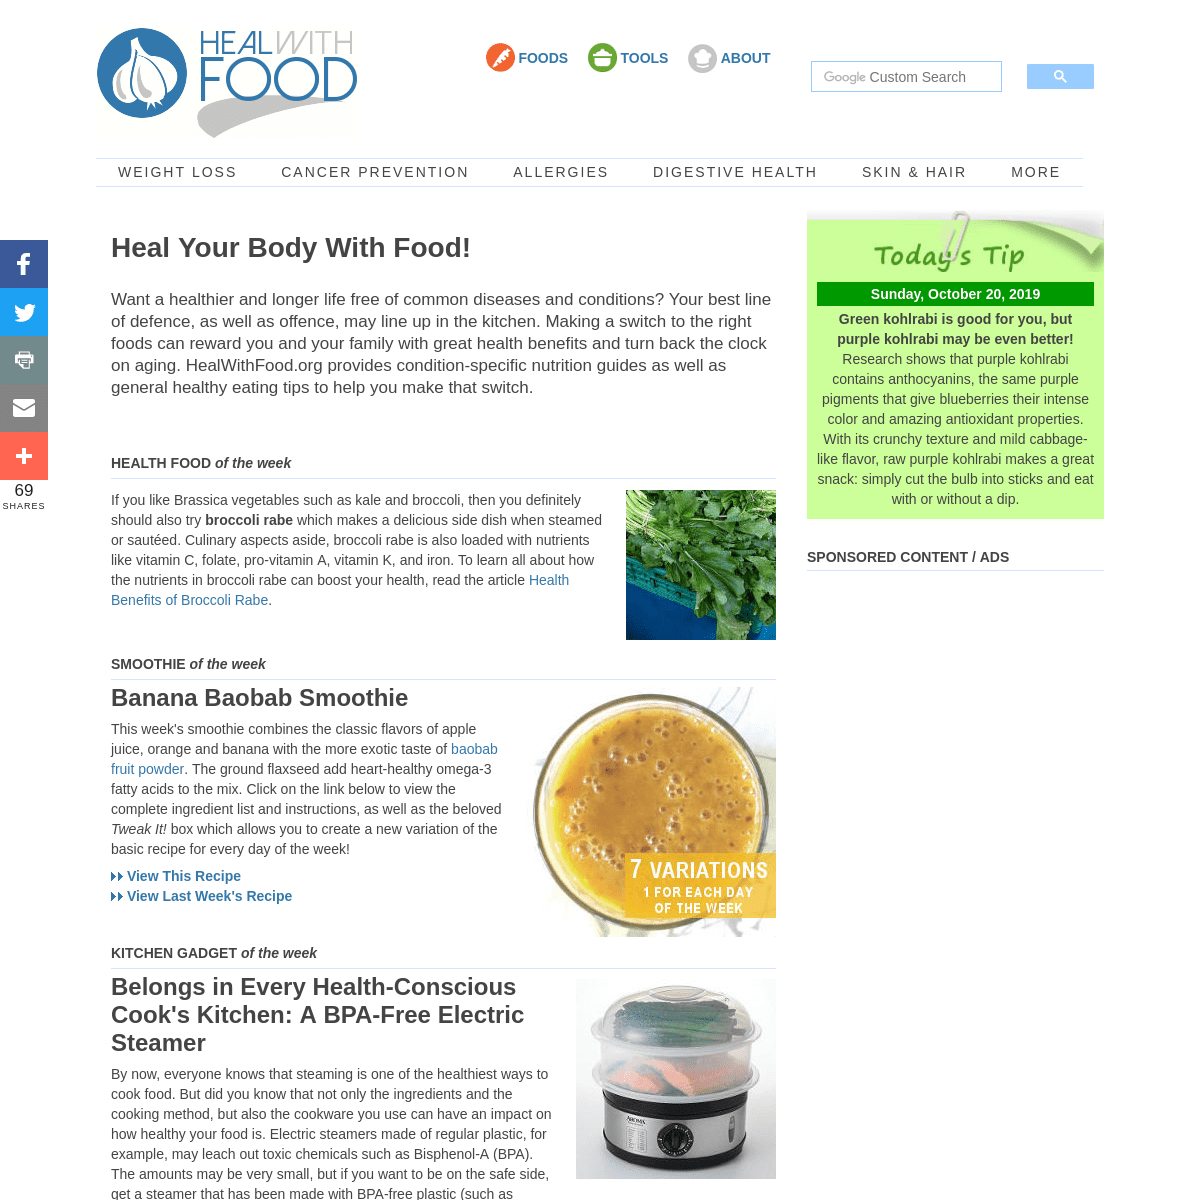 A complete backup of healwithfood.org